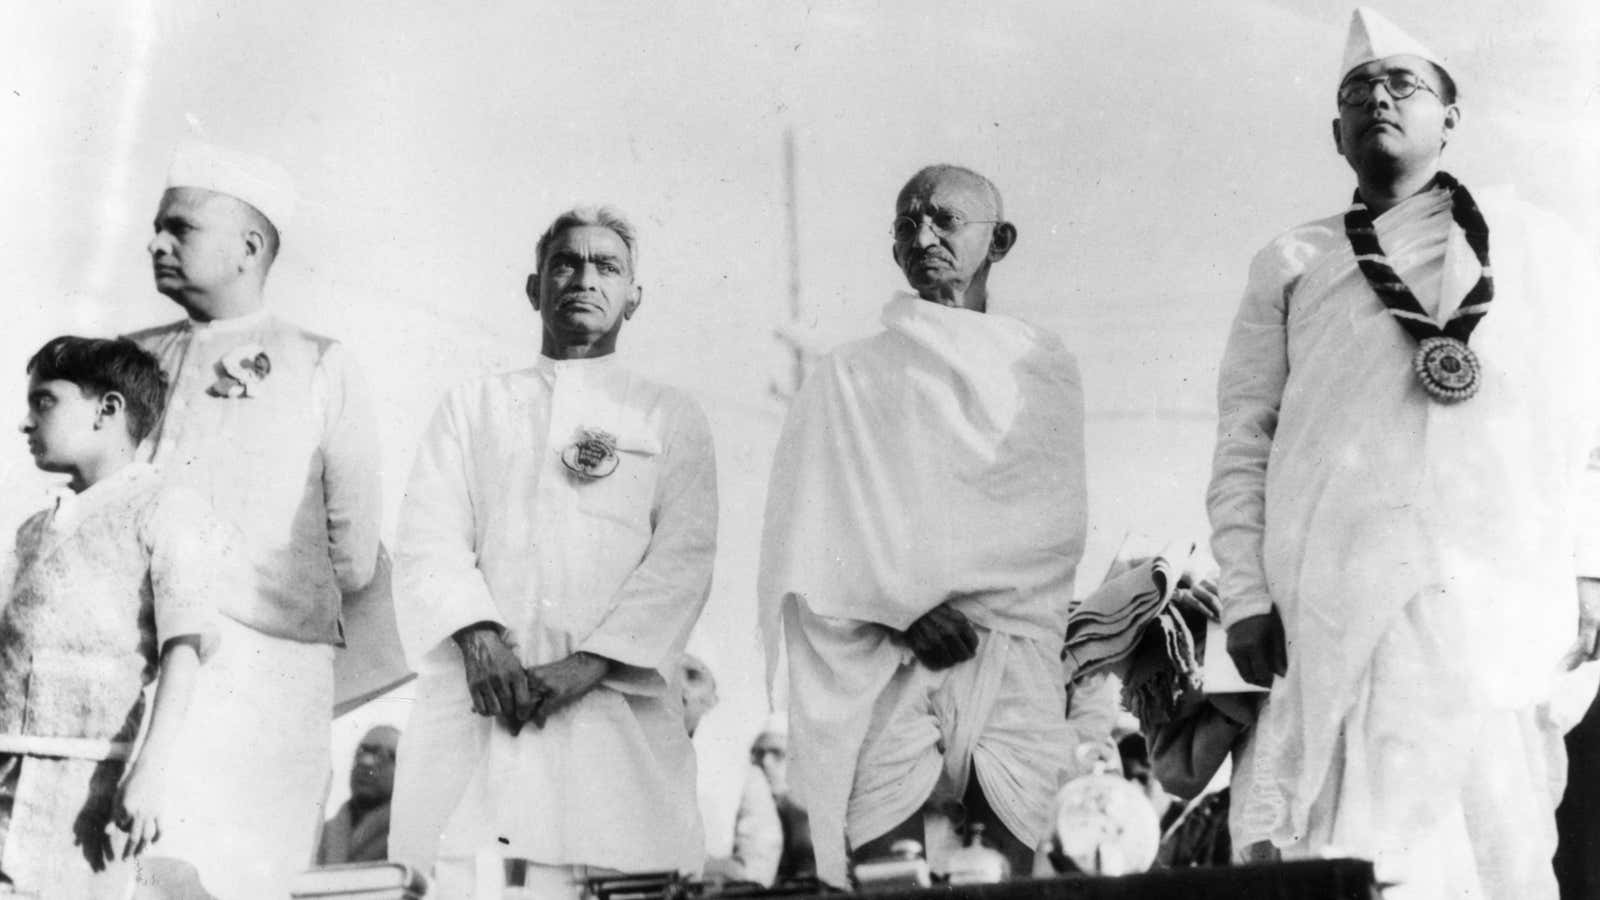 Gandhi, with industrialist Seth Jamnalal Bajaj on the far left, wanted an entrepreneurial culture that put the rights of people first.